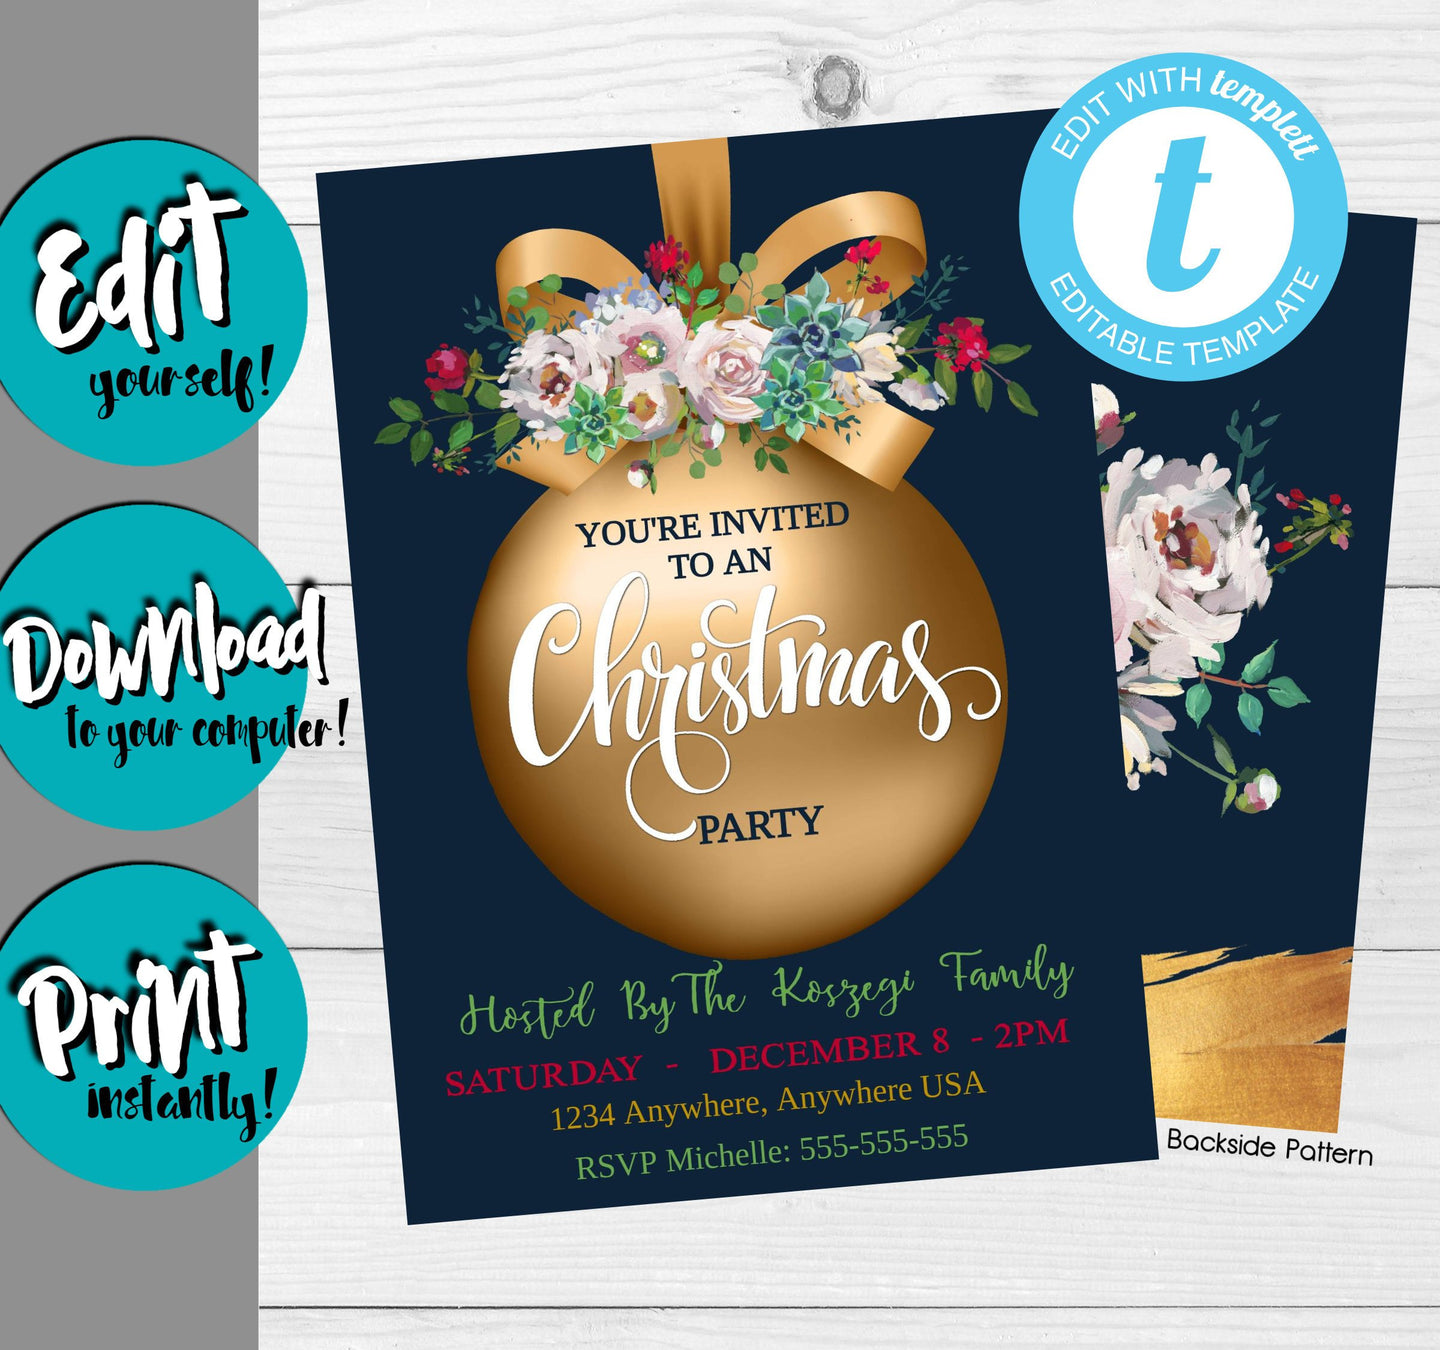 Christmas Party Invitation, Holiday Party Invite, Xmas Party, Ornament, Gold, Instant Download DIY Printable Party Invite Digital Template